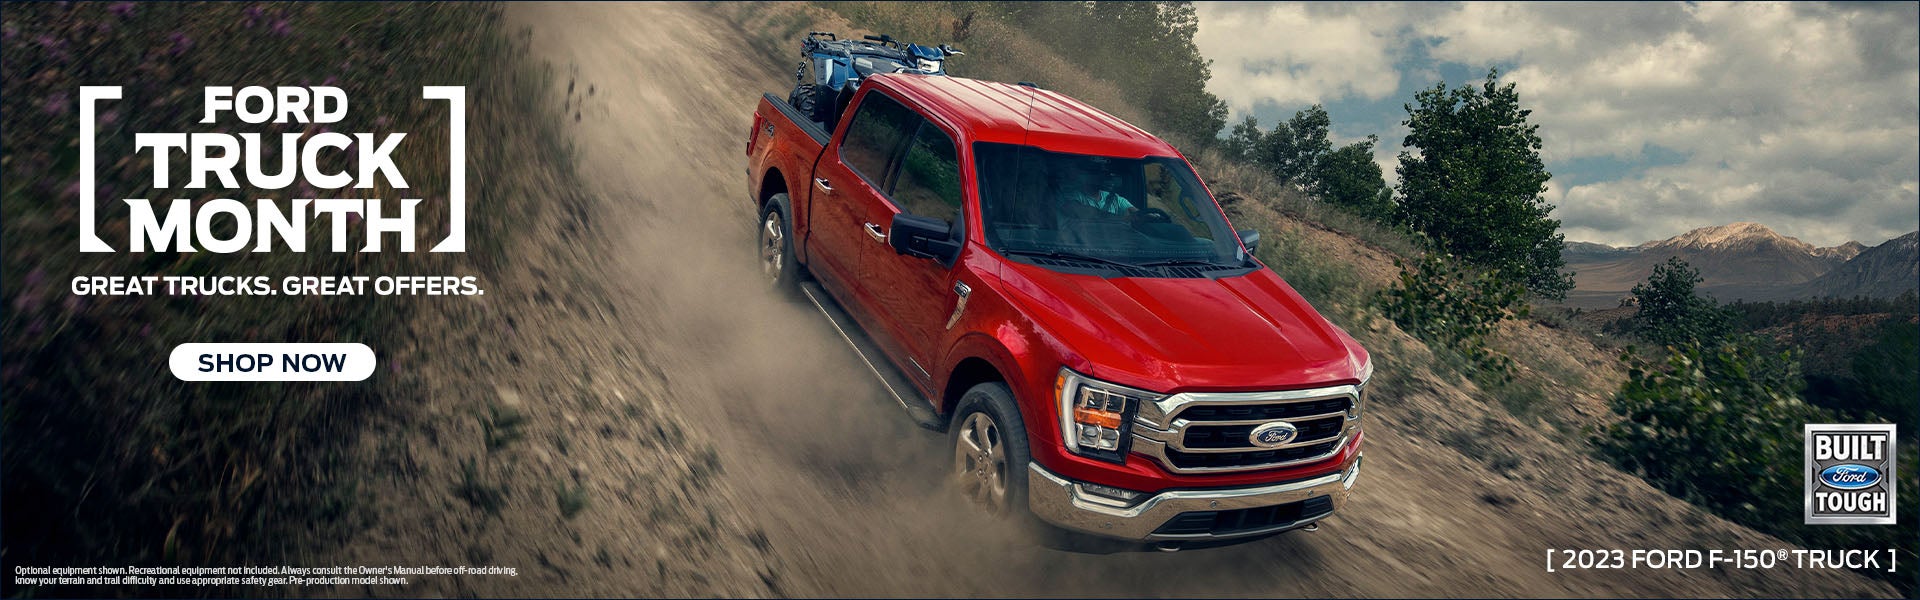 2023 Ford Truck Month